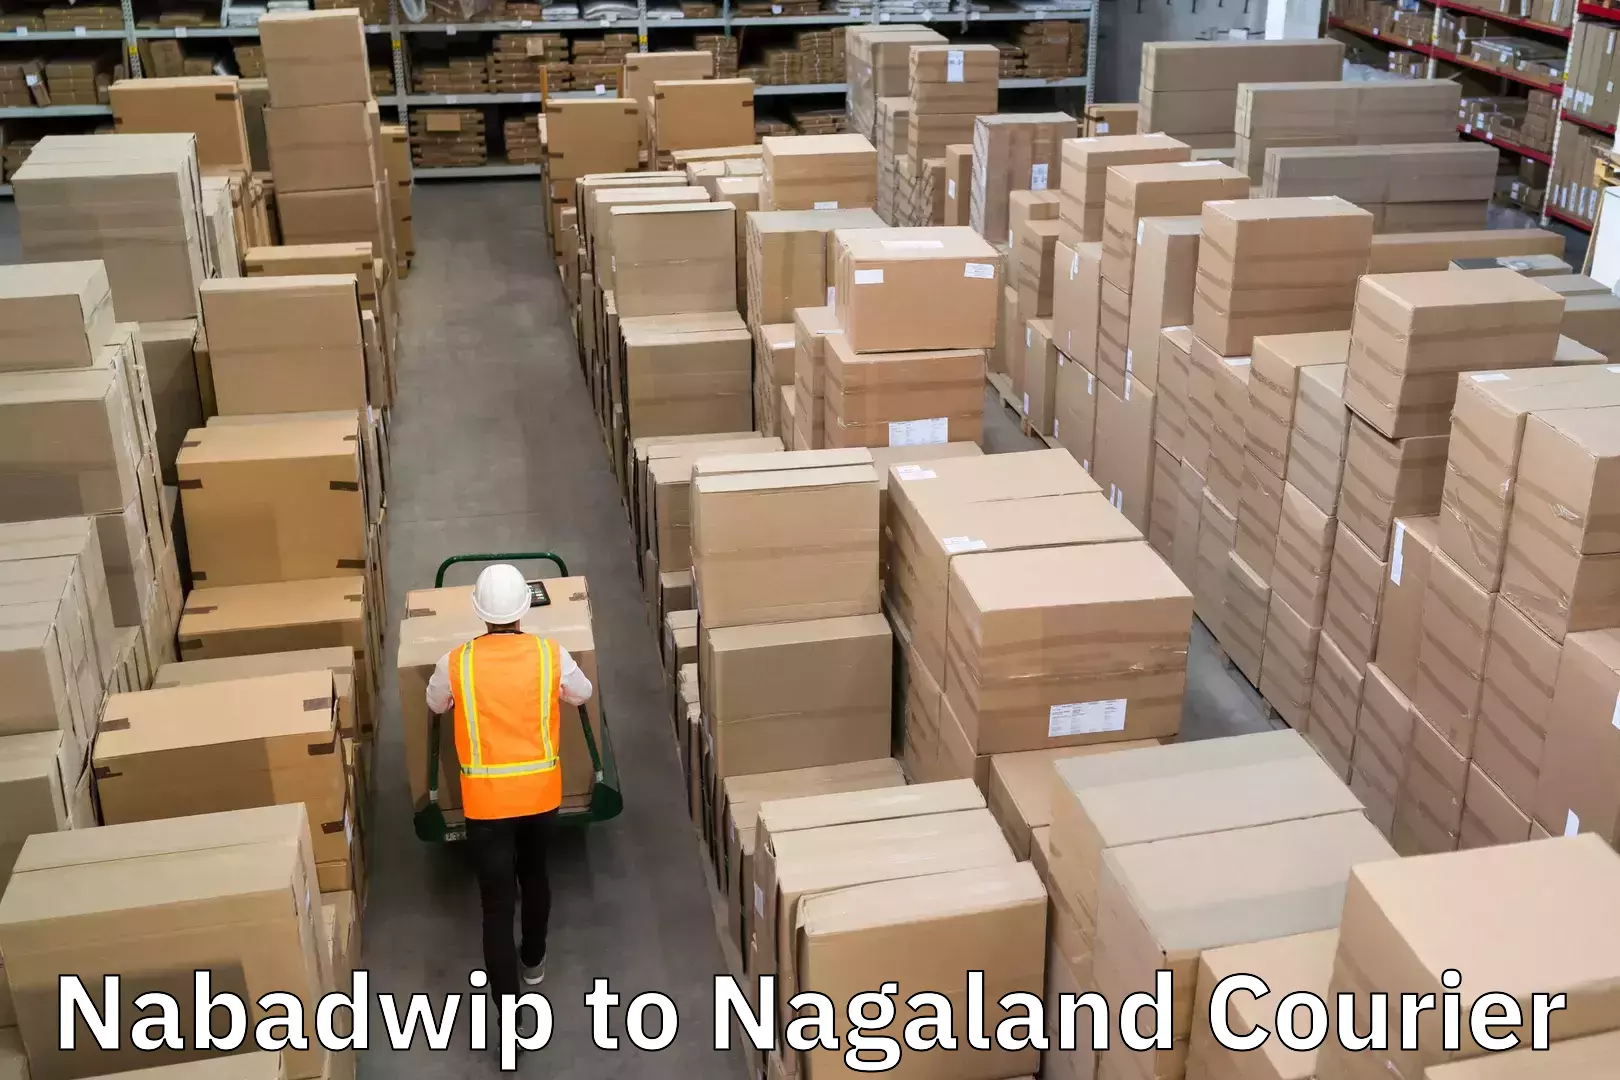 Courier service comparison in Nabadwip to Kiphire